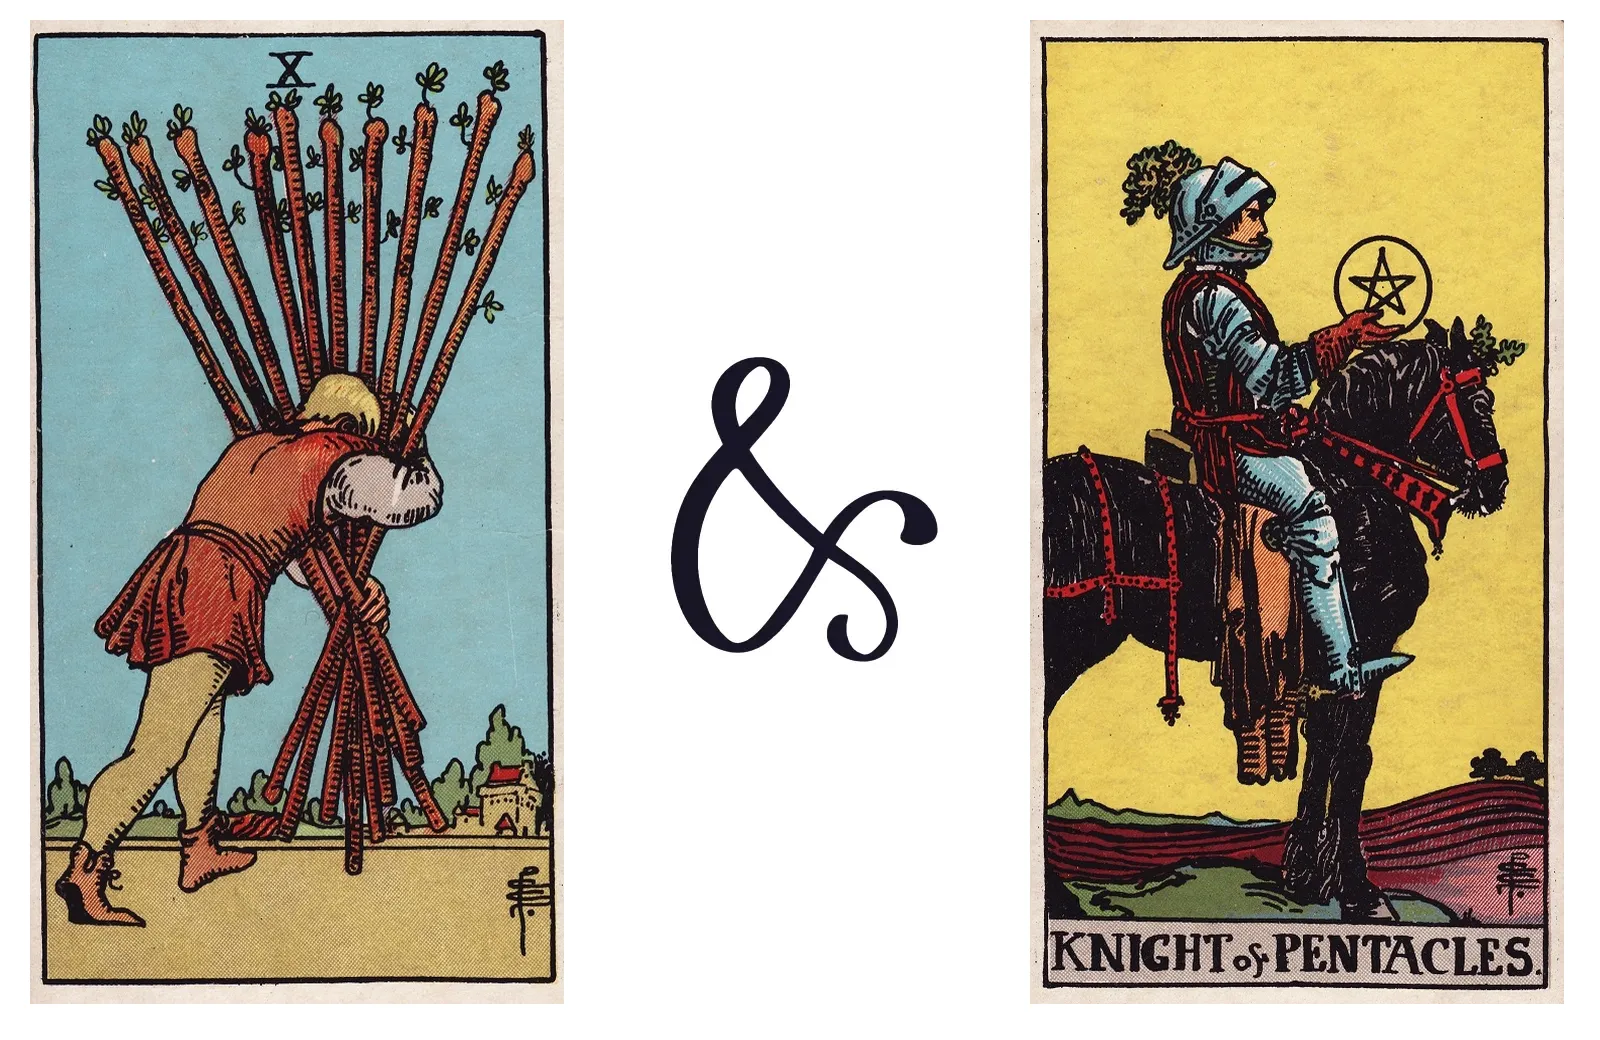 Ten of Wands and Knight of Pentacles